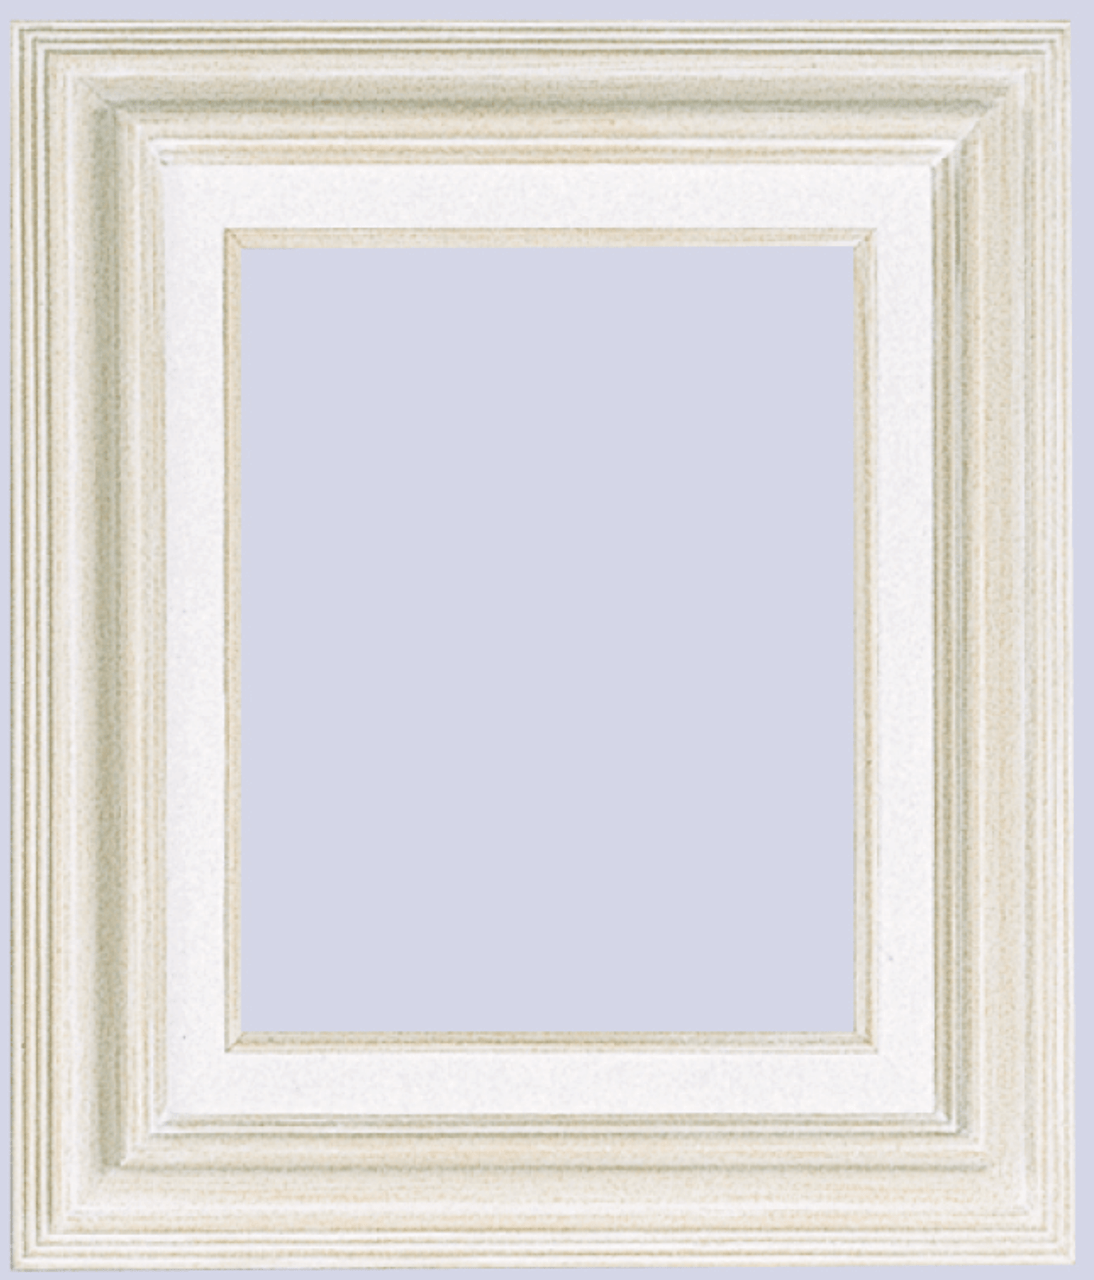 3 Inch Econo Wood Frames With Linen Liners: 15X30